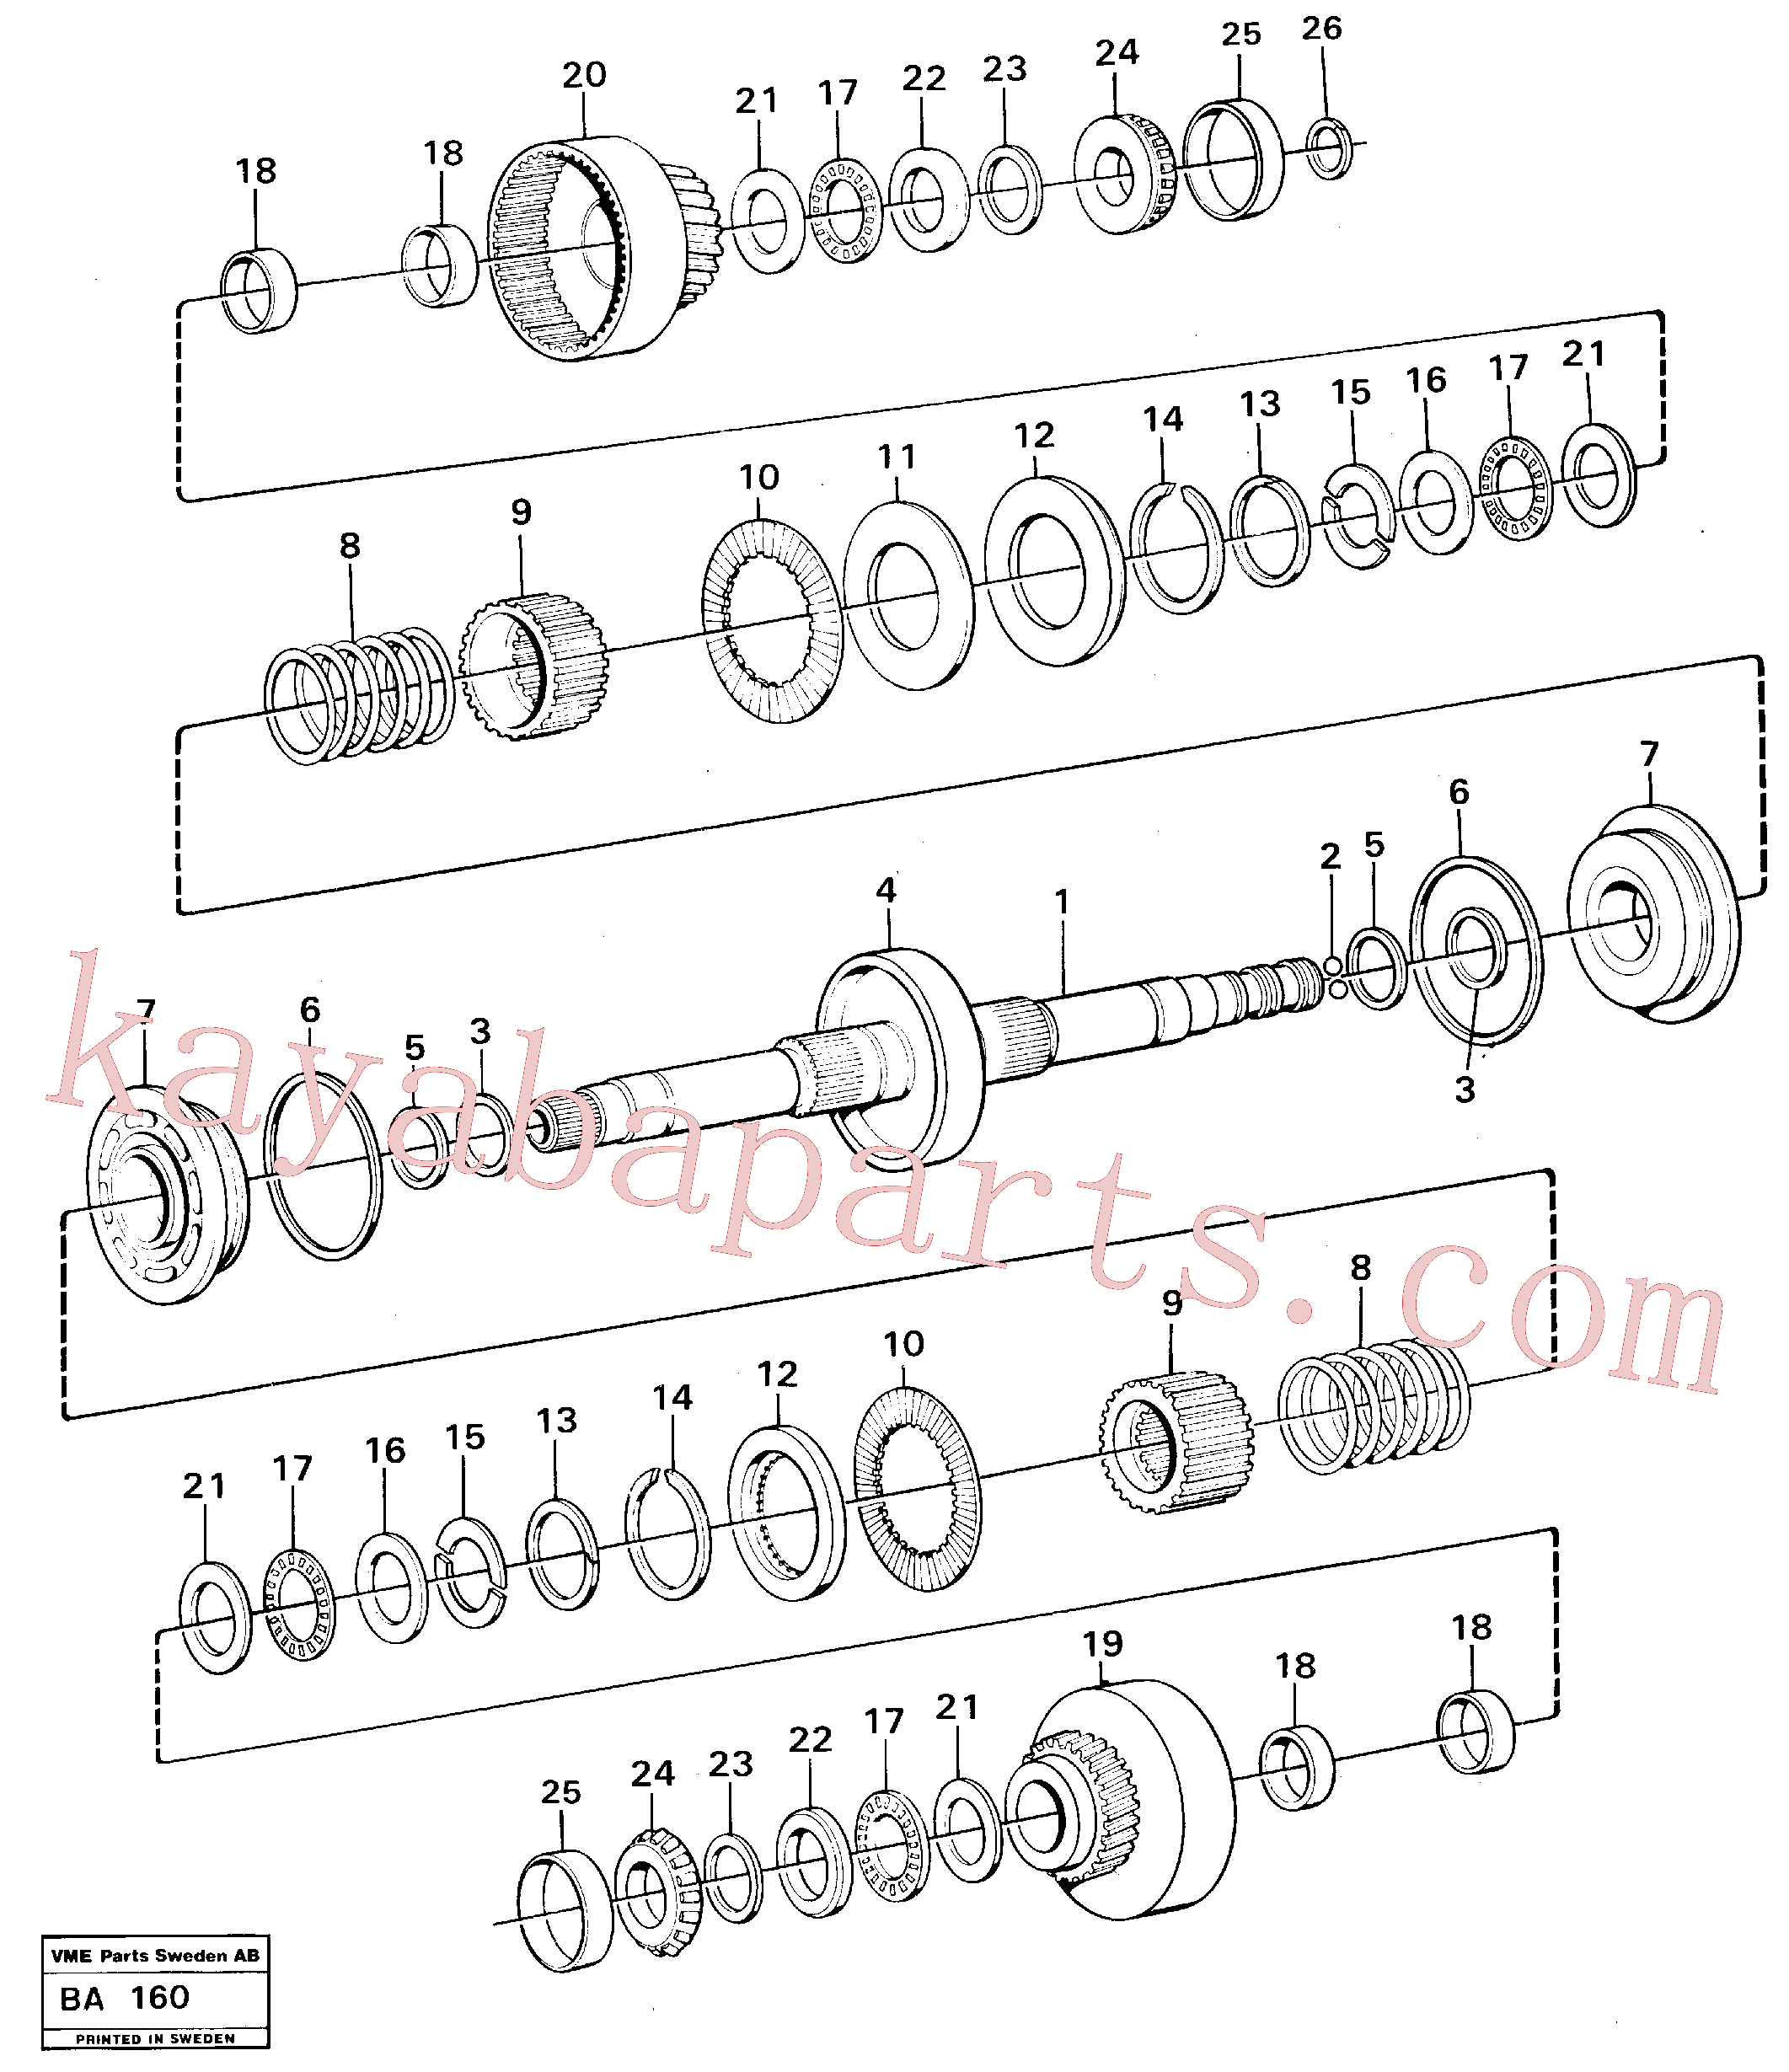 VOE184645 for Volvo Clutches forward and reverse(BA160 assembly)